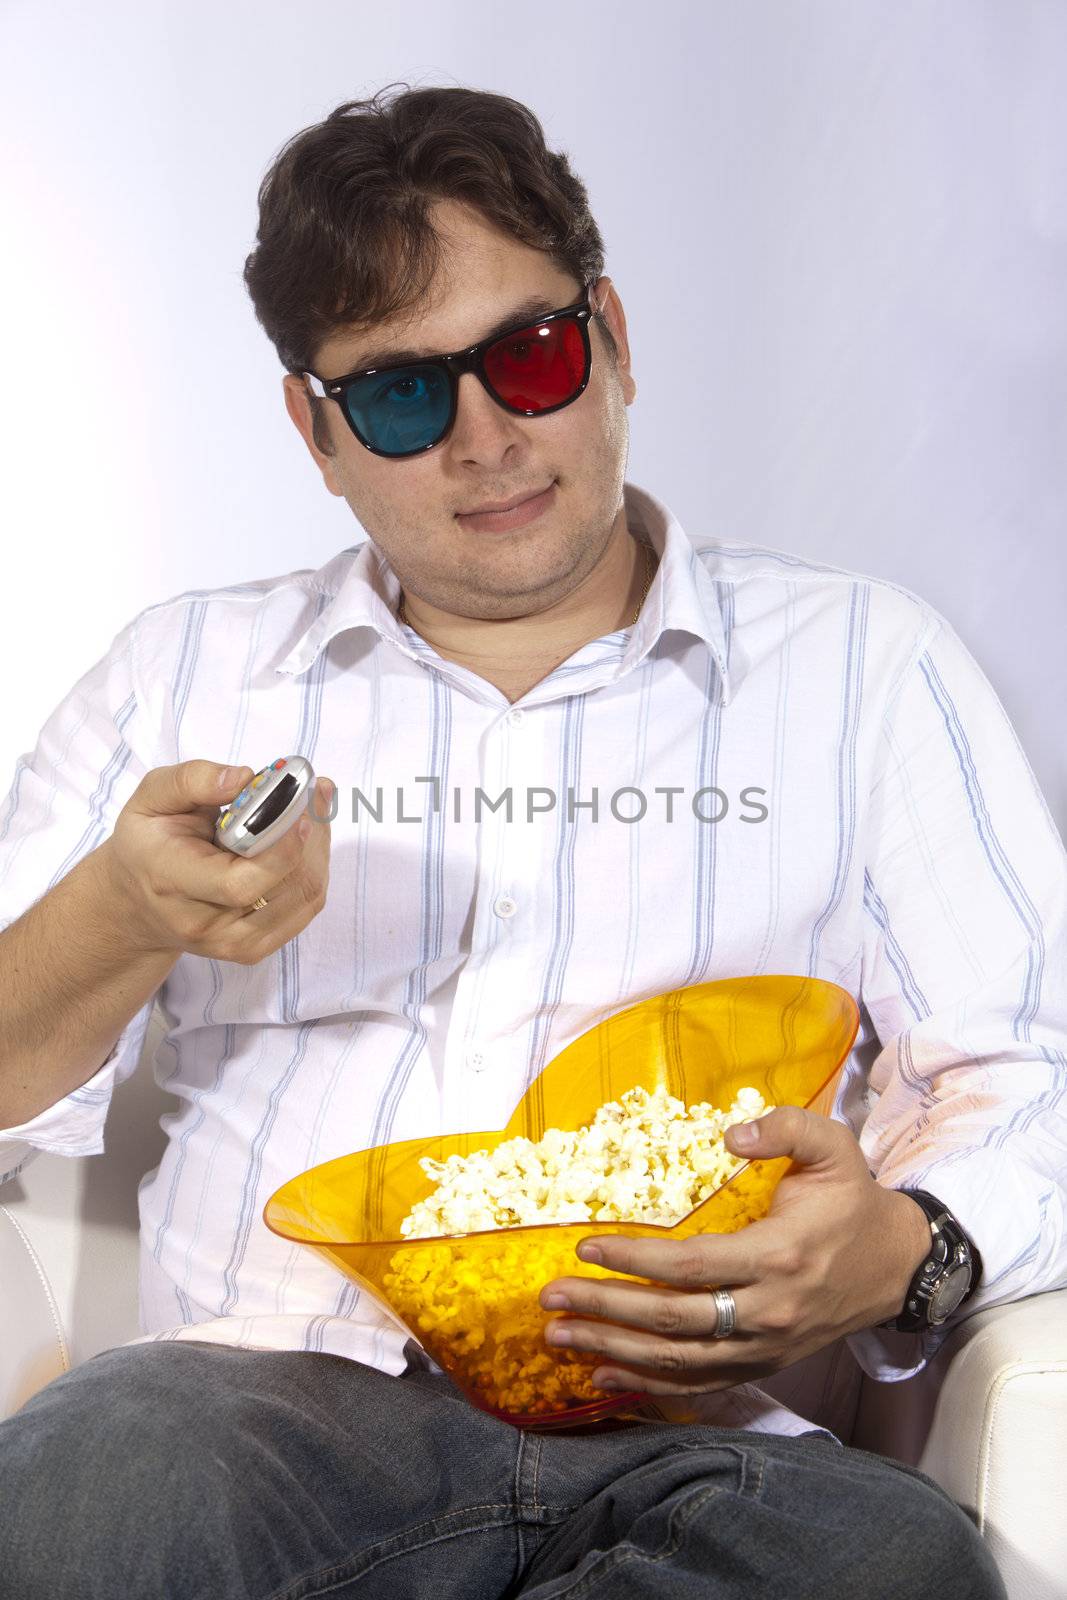 A young man watching a movie in 3D, with stylish 3D glasses and eating popcorn.